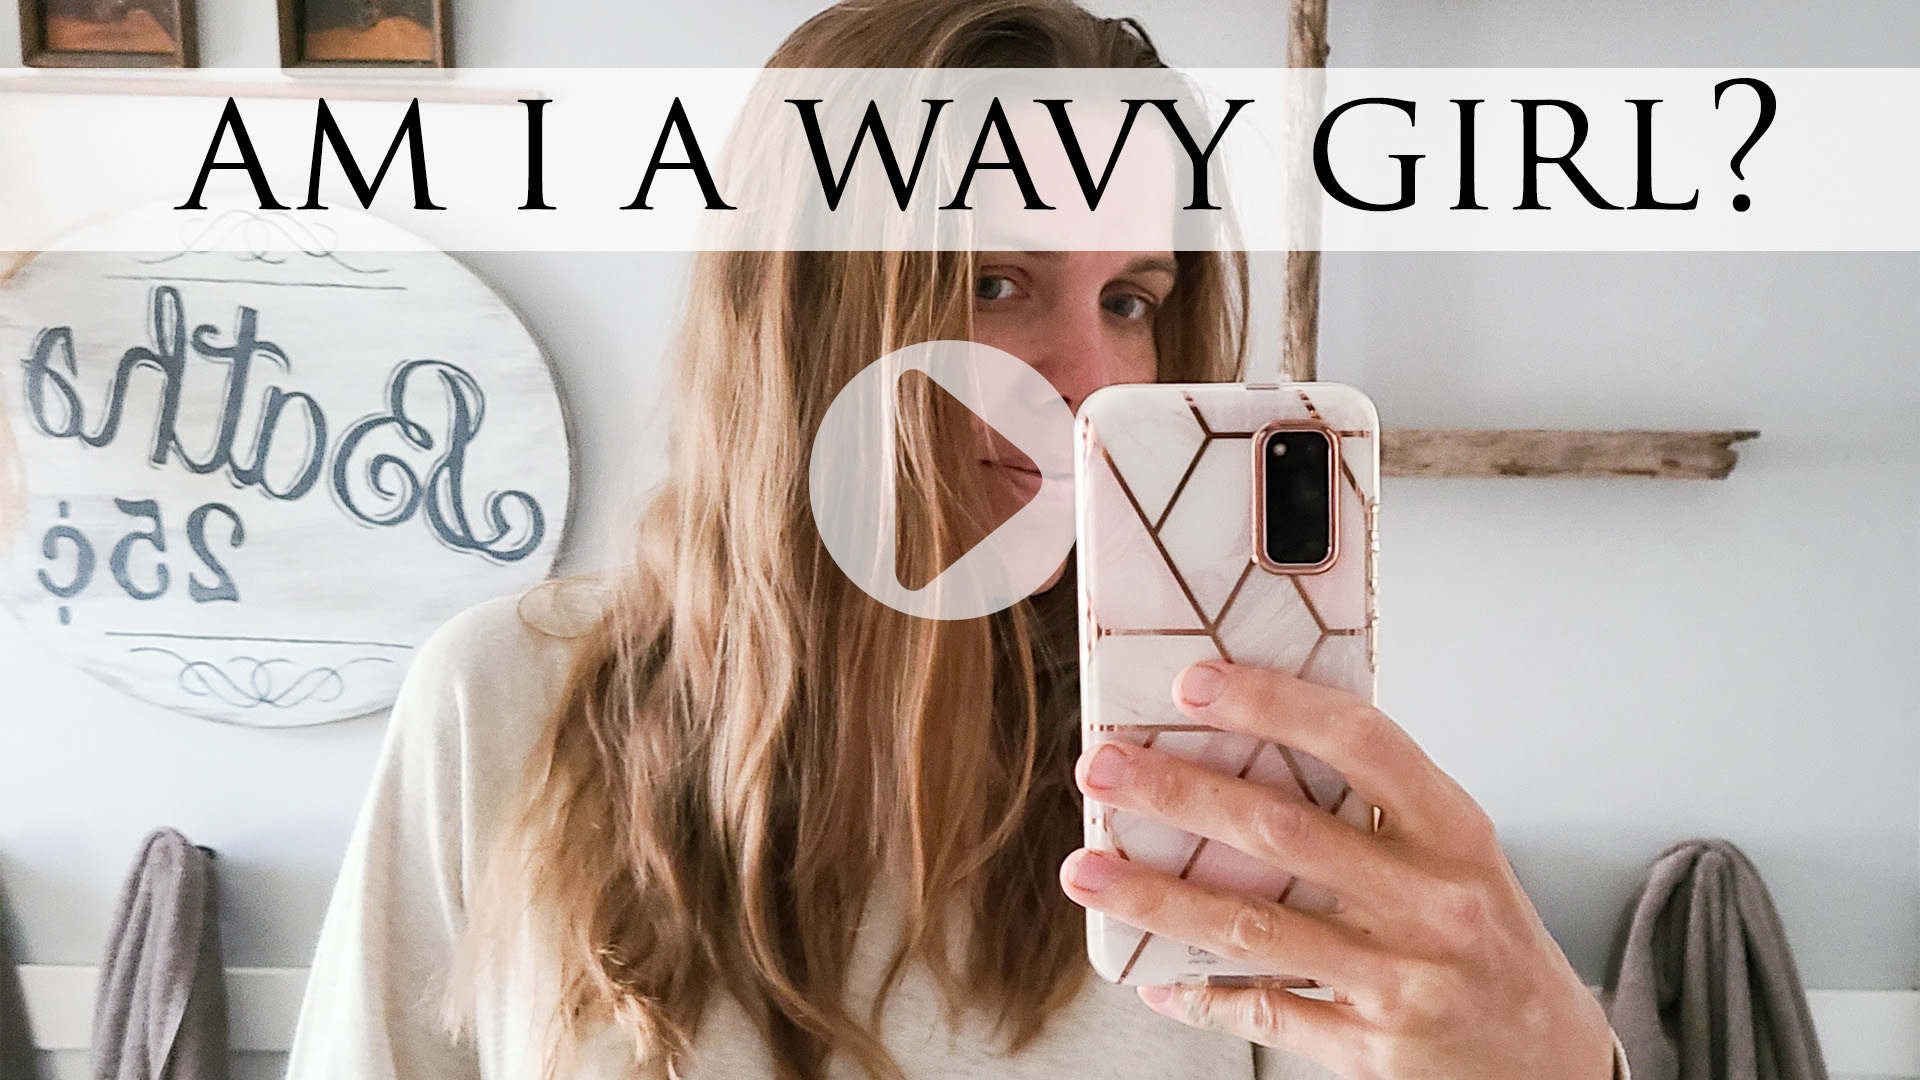 Video of 2a, 2b, 2c Wavy Hair Girl Journey with DIY Flaxseed Gel & Rice Water Rinse Recipe, and a DIY Hair Towel Tutorial with Free Pattern by Larissa of Prodigal Pieces | prodigalpieces.com #prodigalpieces #wavygirl #hair #curlfriend #curlygirl